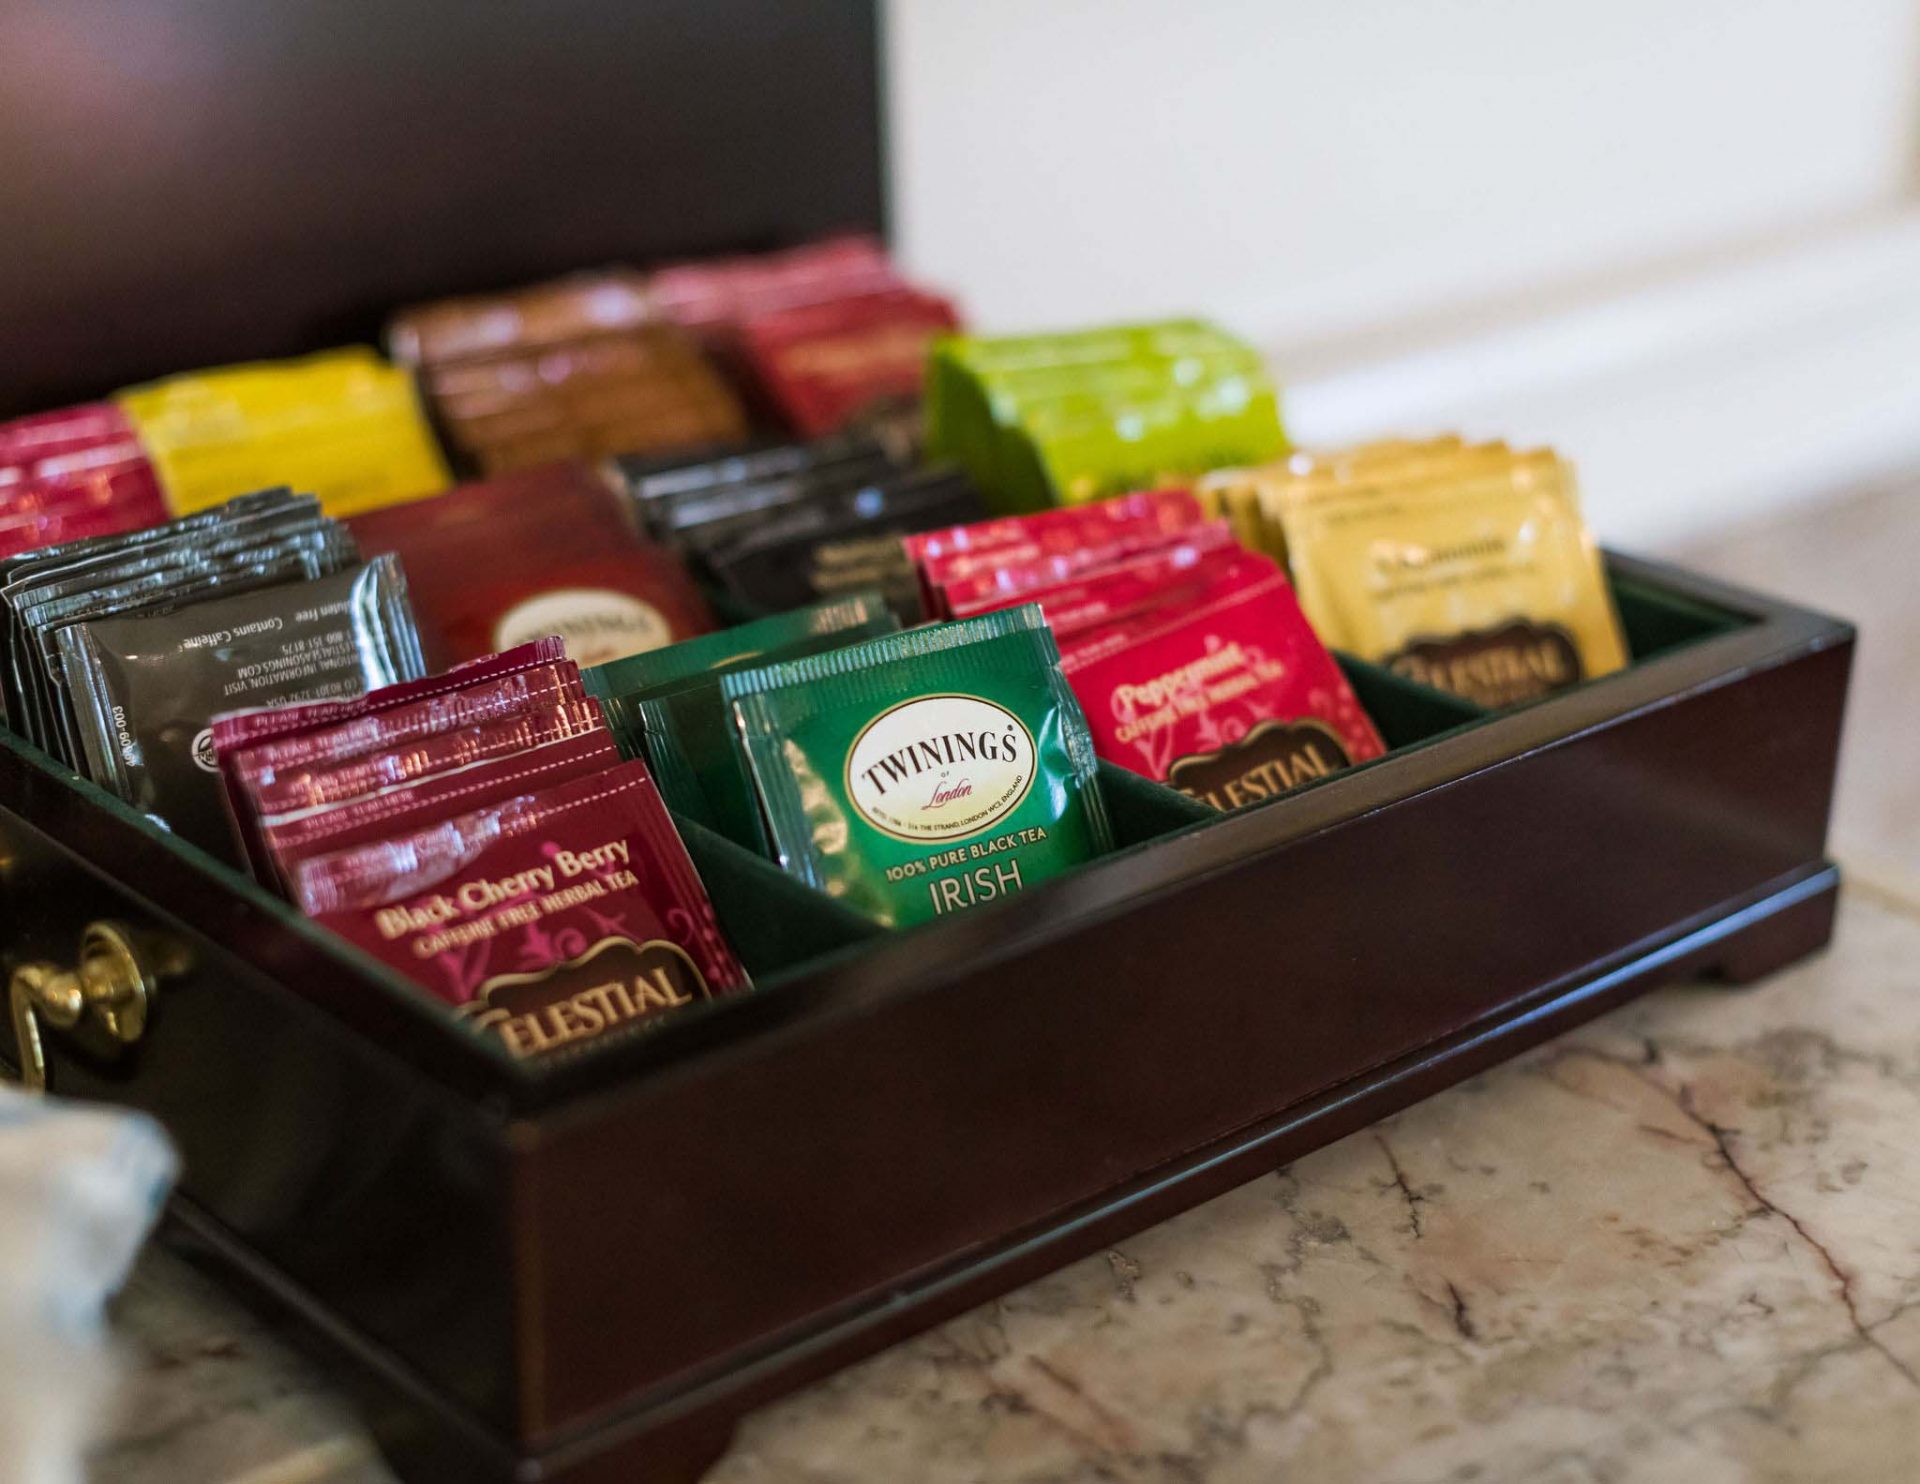 A close-up of a tea box with a selection of Twinnings tea bags.